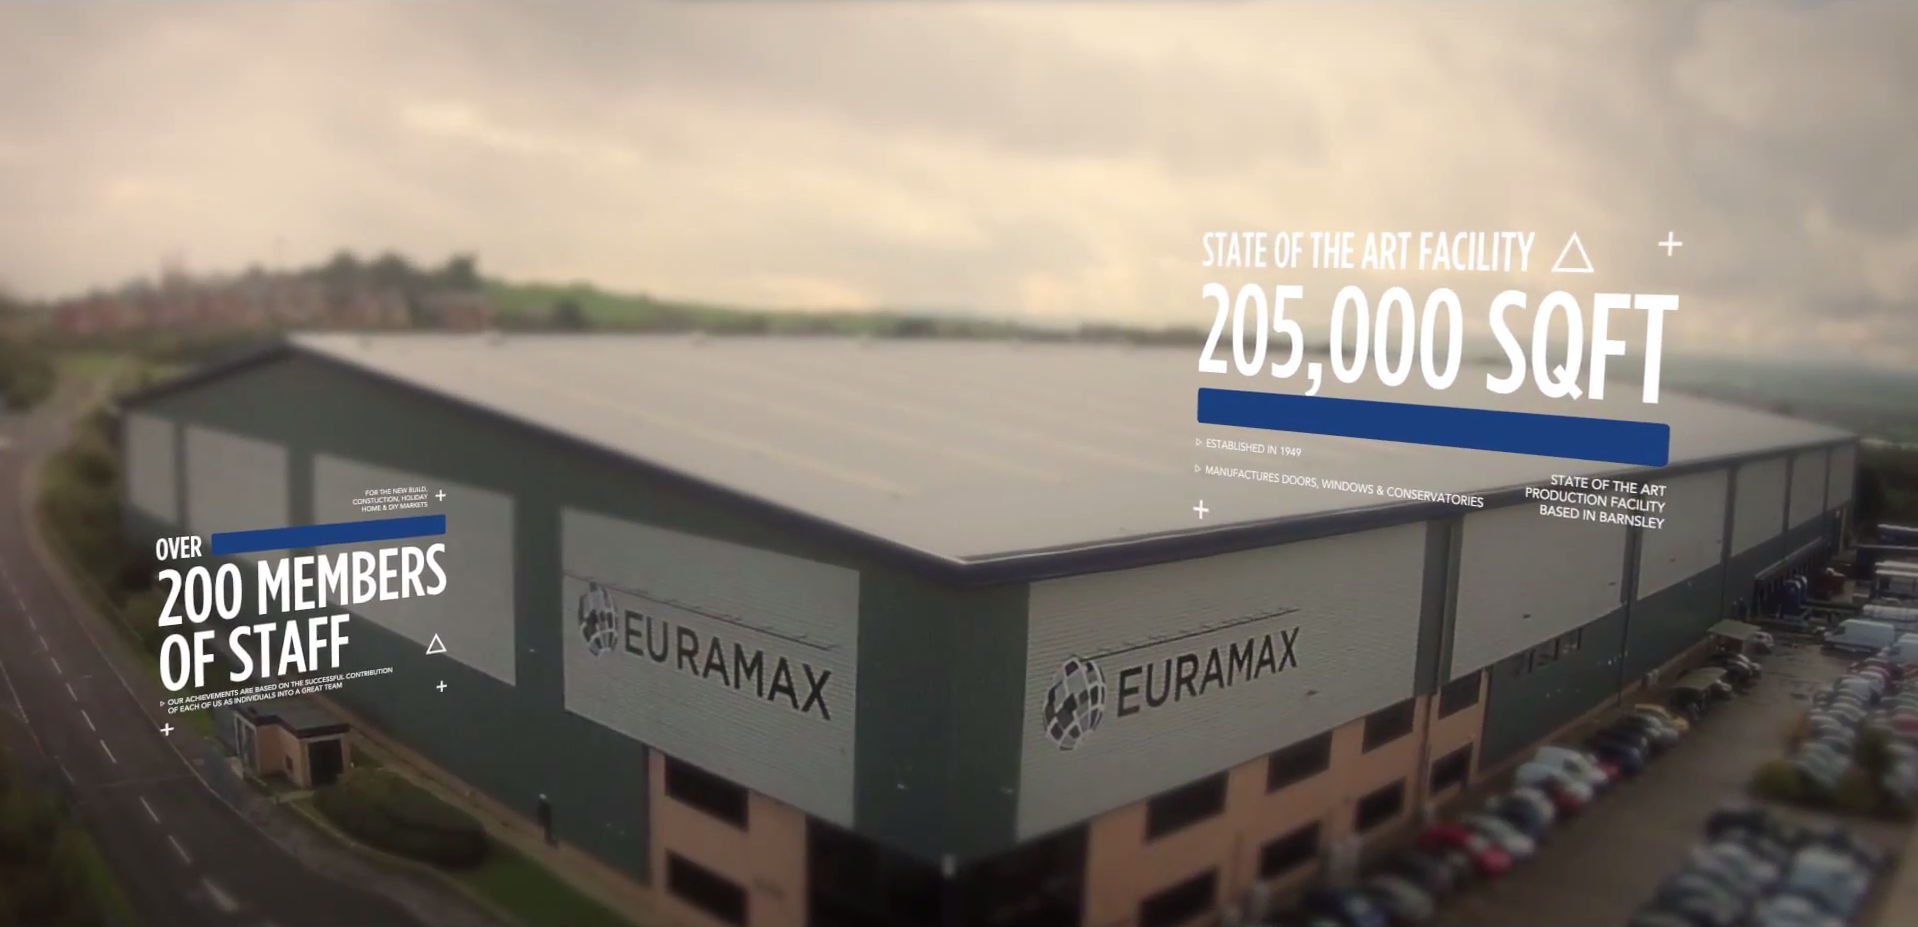 Euramax | Motiv Productions - Creating Video for Business